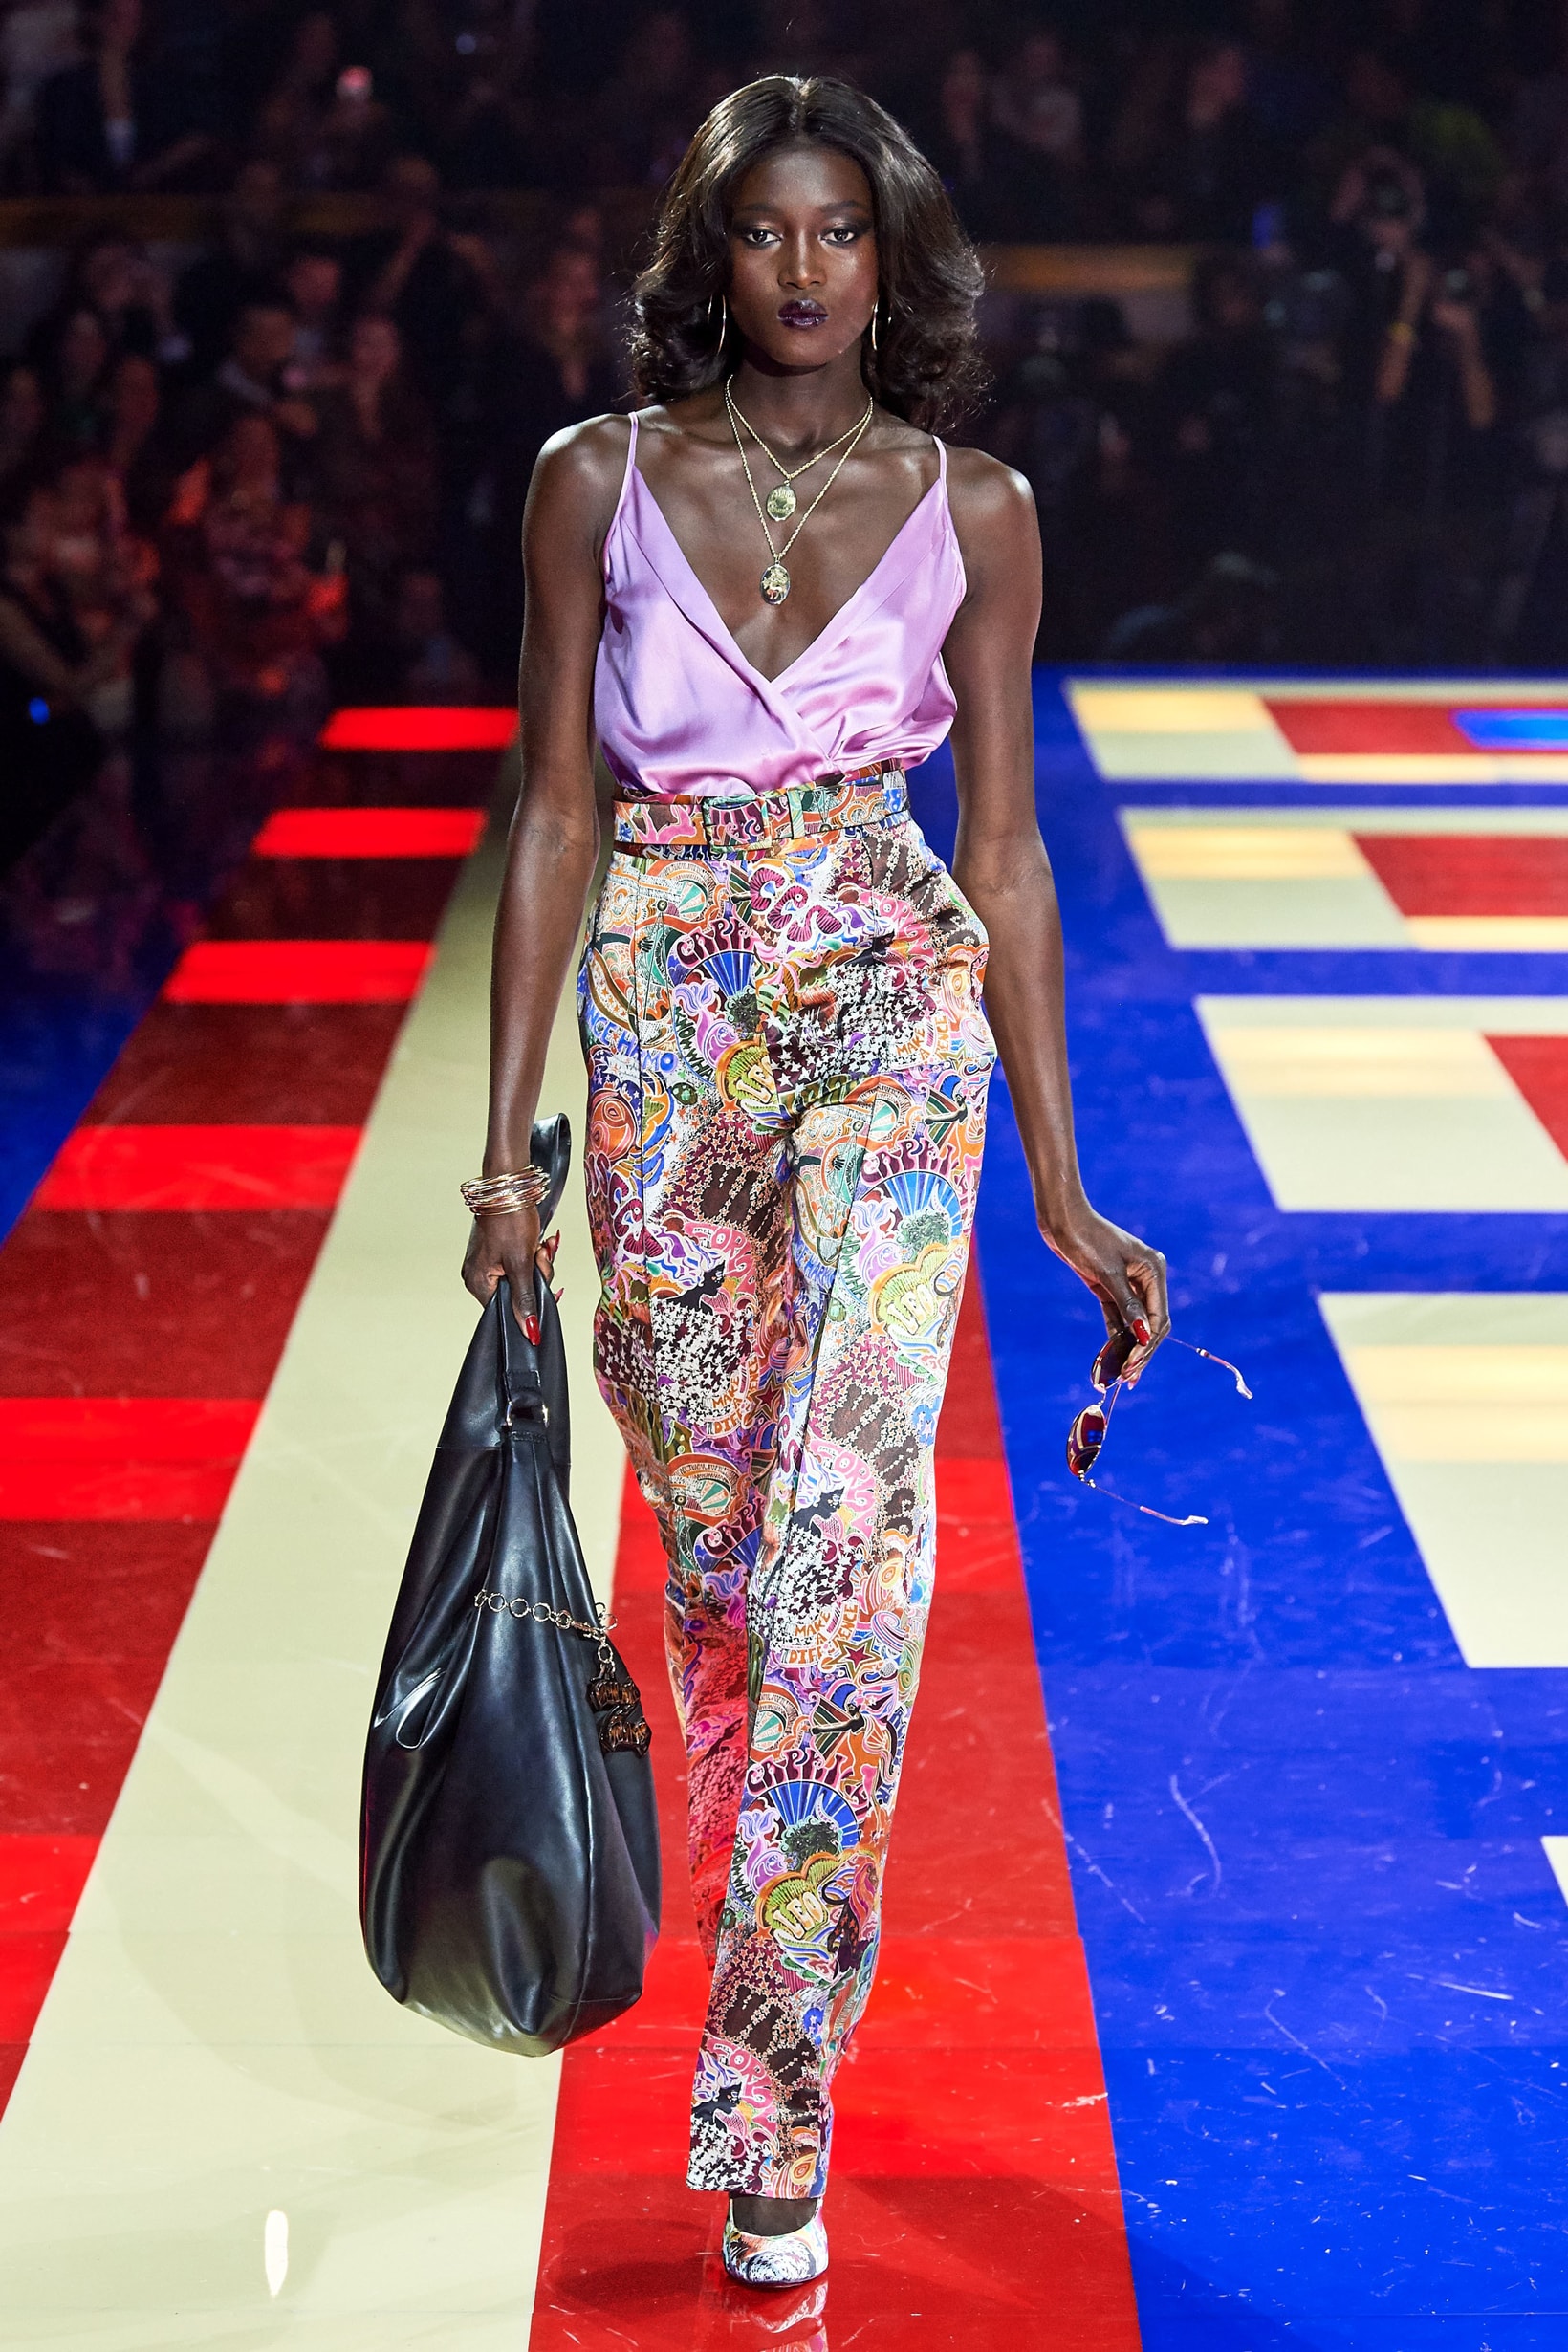 Tommy Hilfiger TommyNow Zendaya Spring 2019 Paris Fashion Week Show Collection Silk Top Purple Patterned Pants White Pink Blue